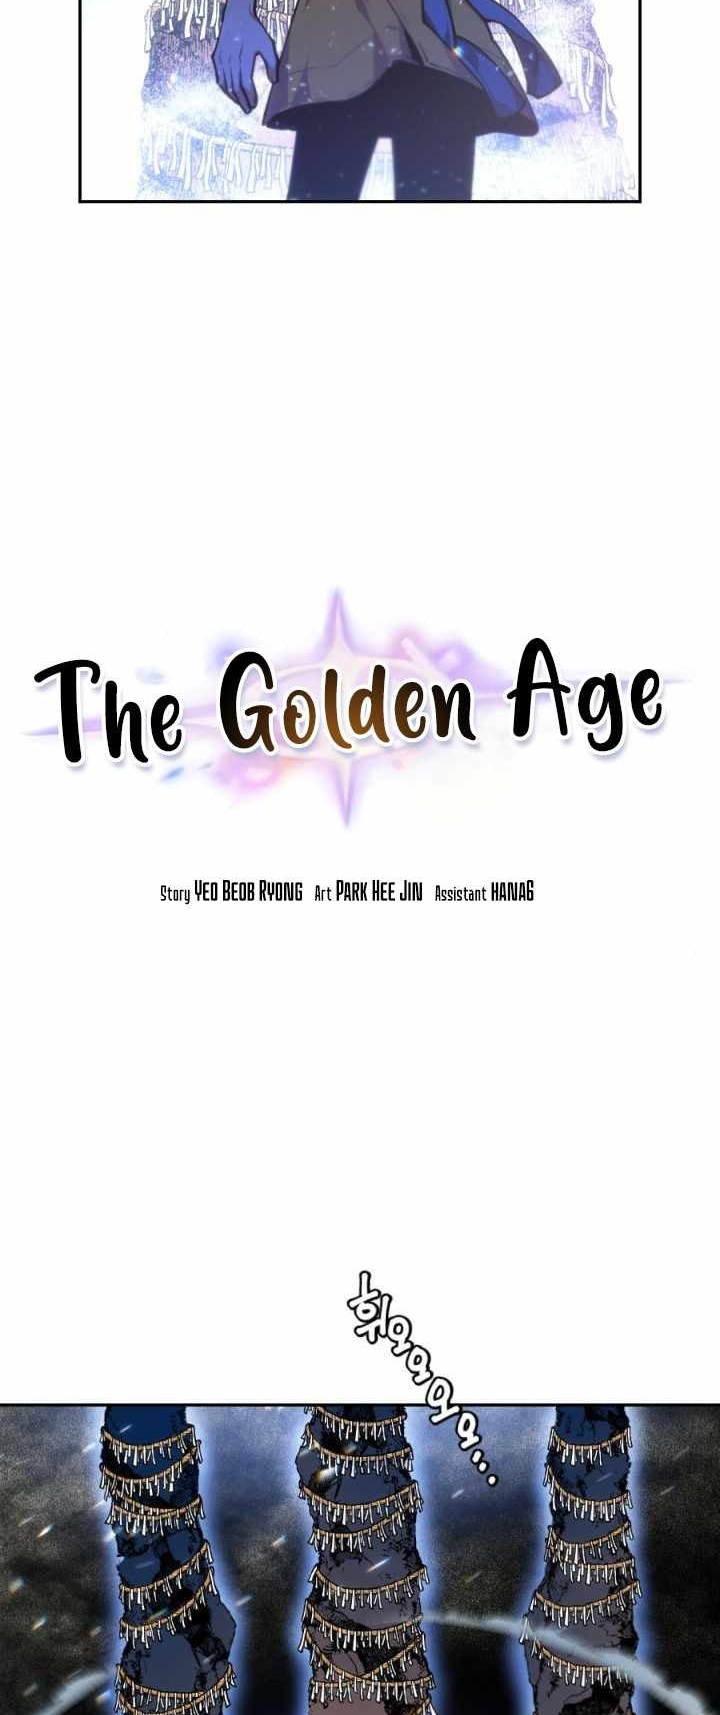 The Golden Age16 (2)